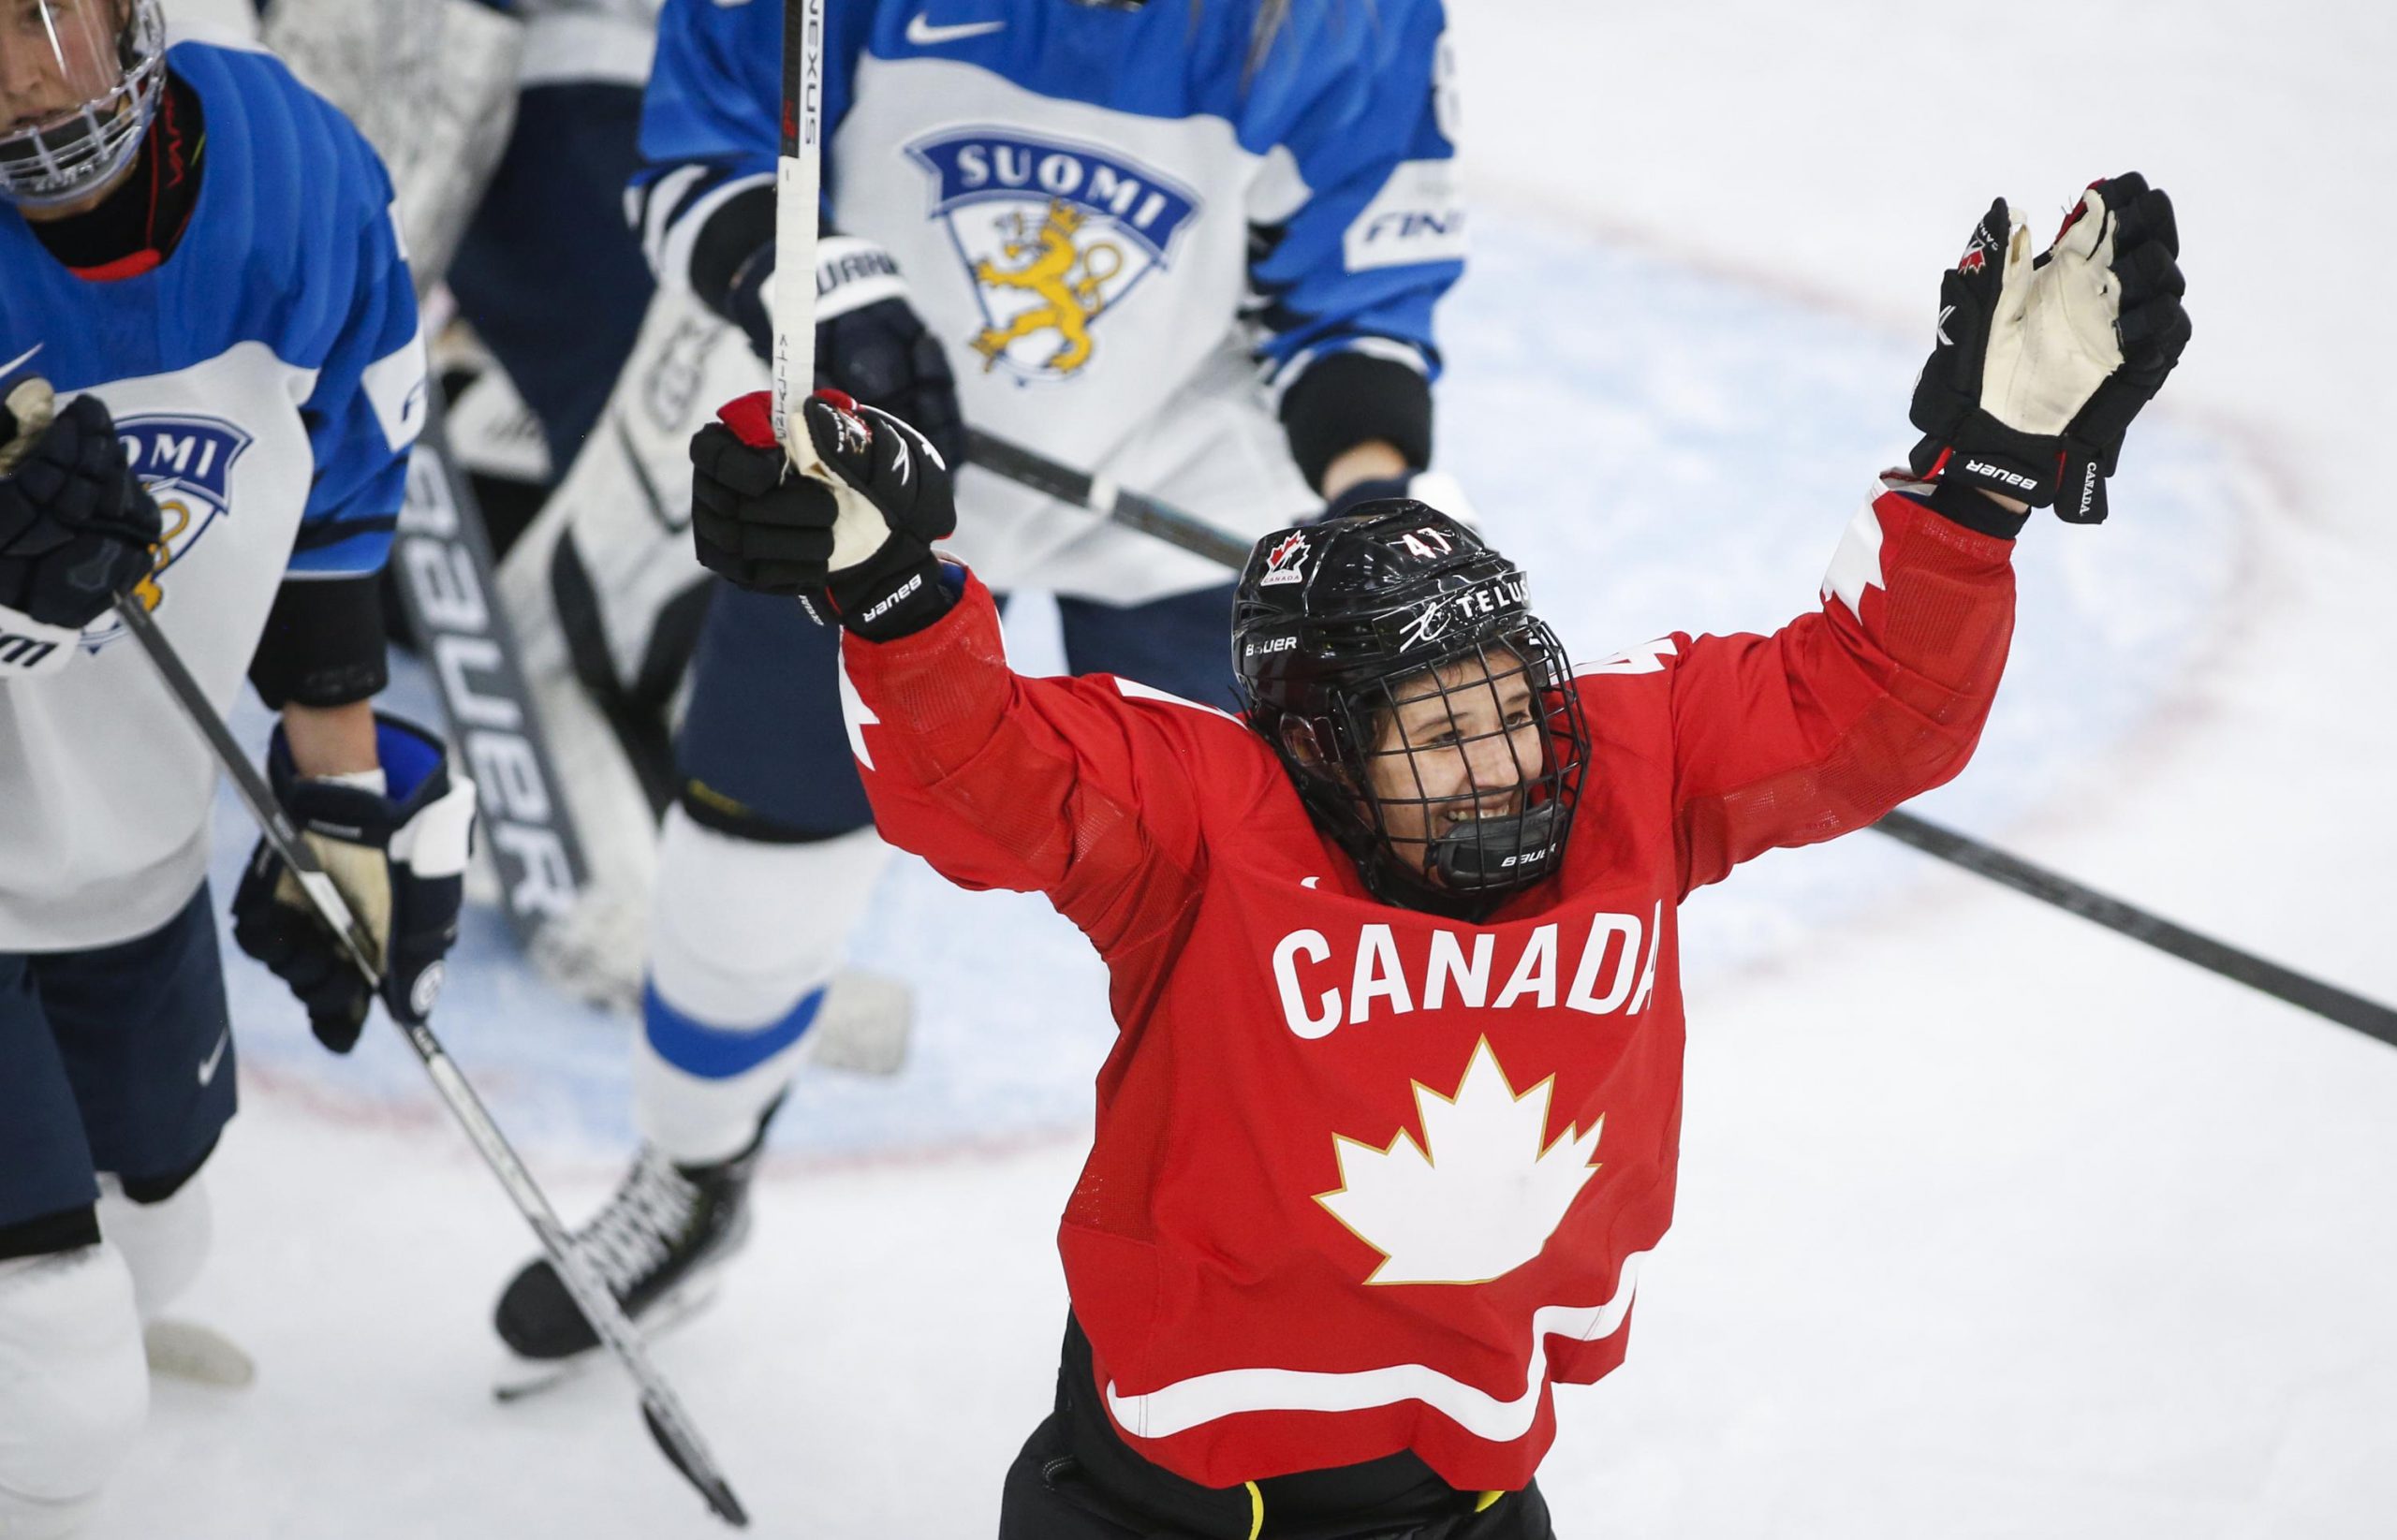 Canada beat Finland 5-3 in the opening match of the Women's World Hockey League